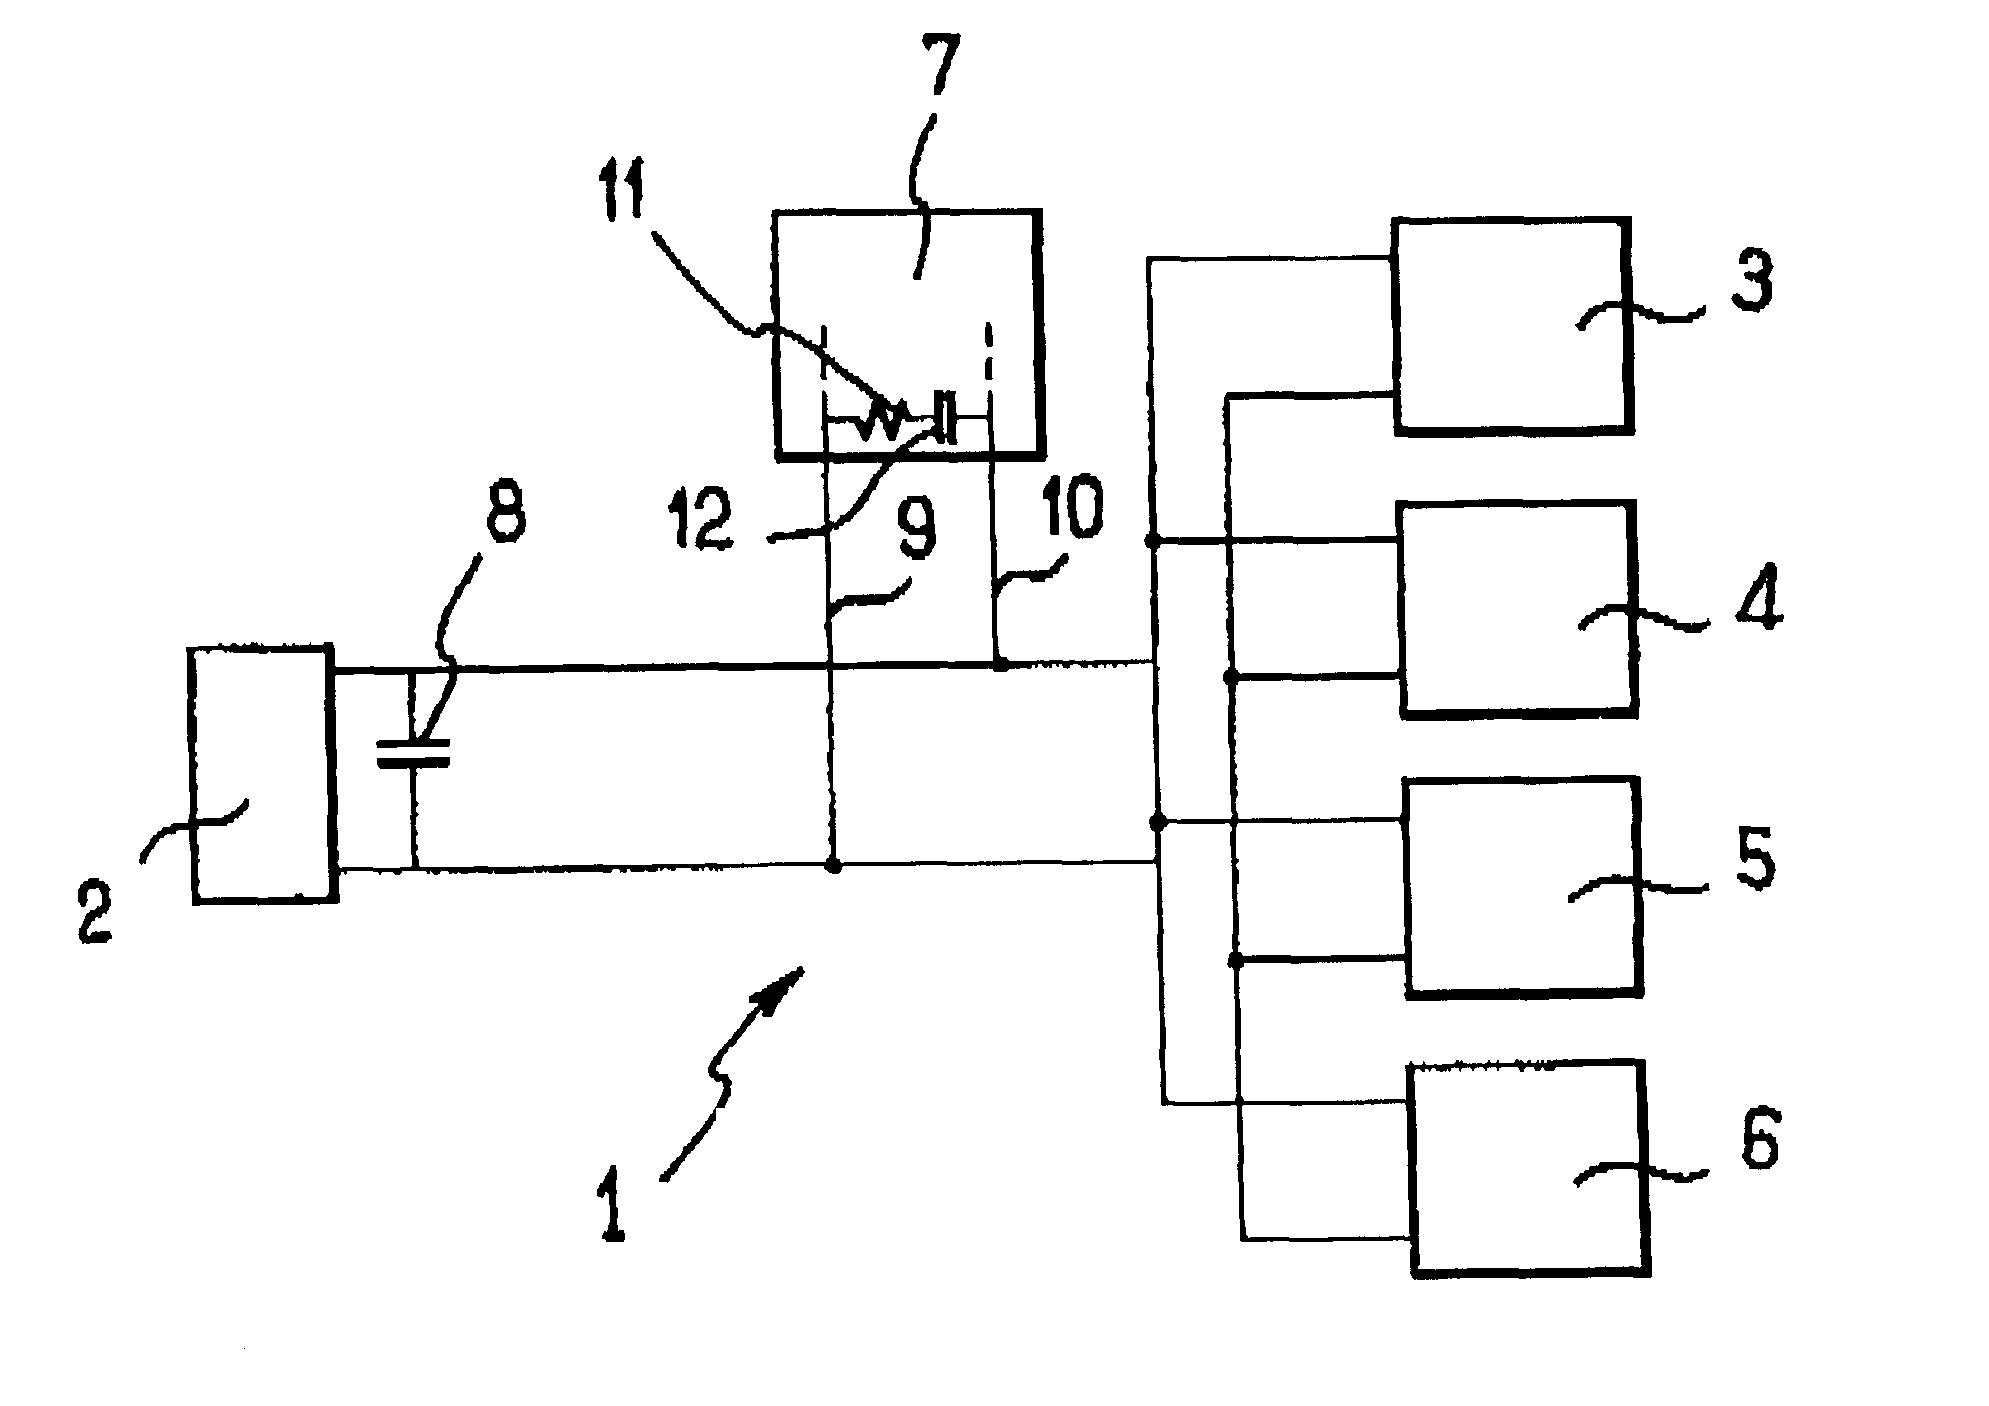 Electricity distribution network for a motor vehicle